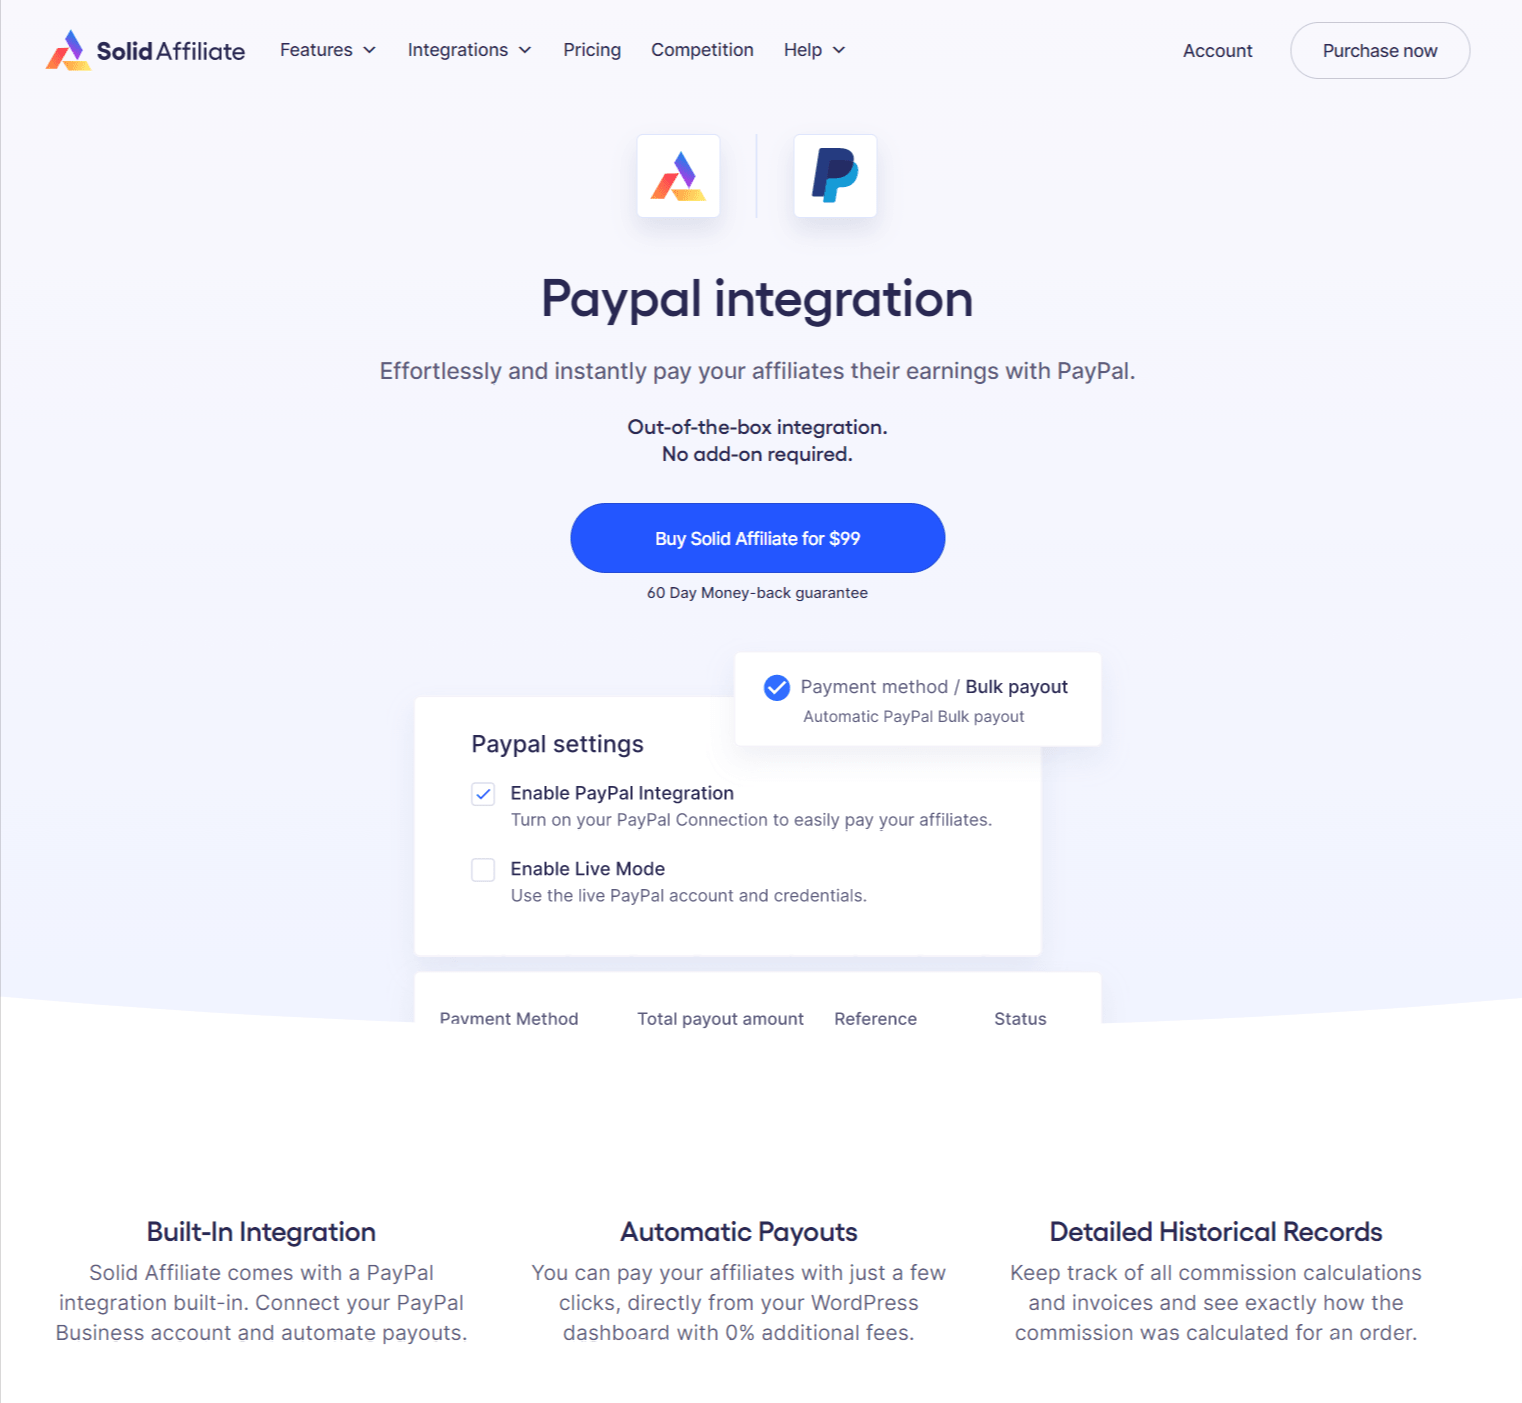 PayPal Integrations